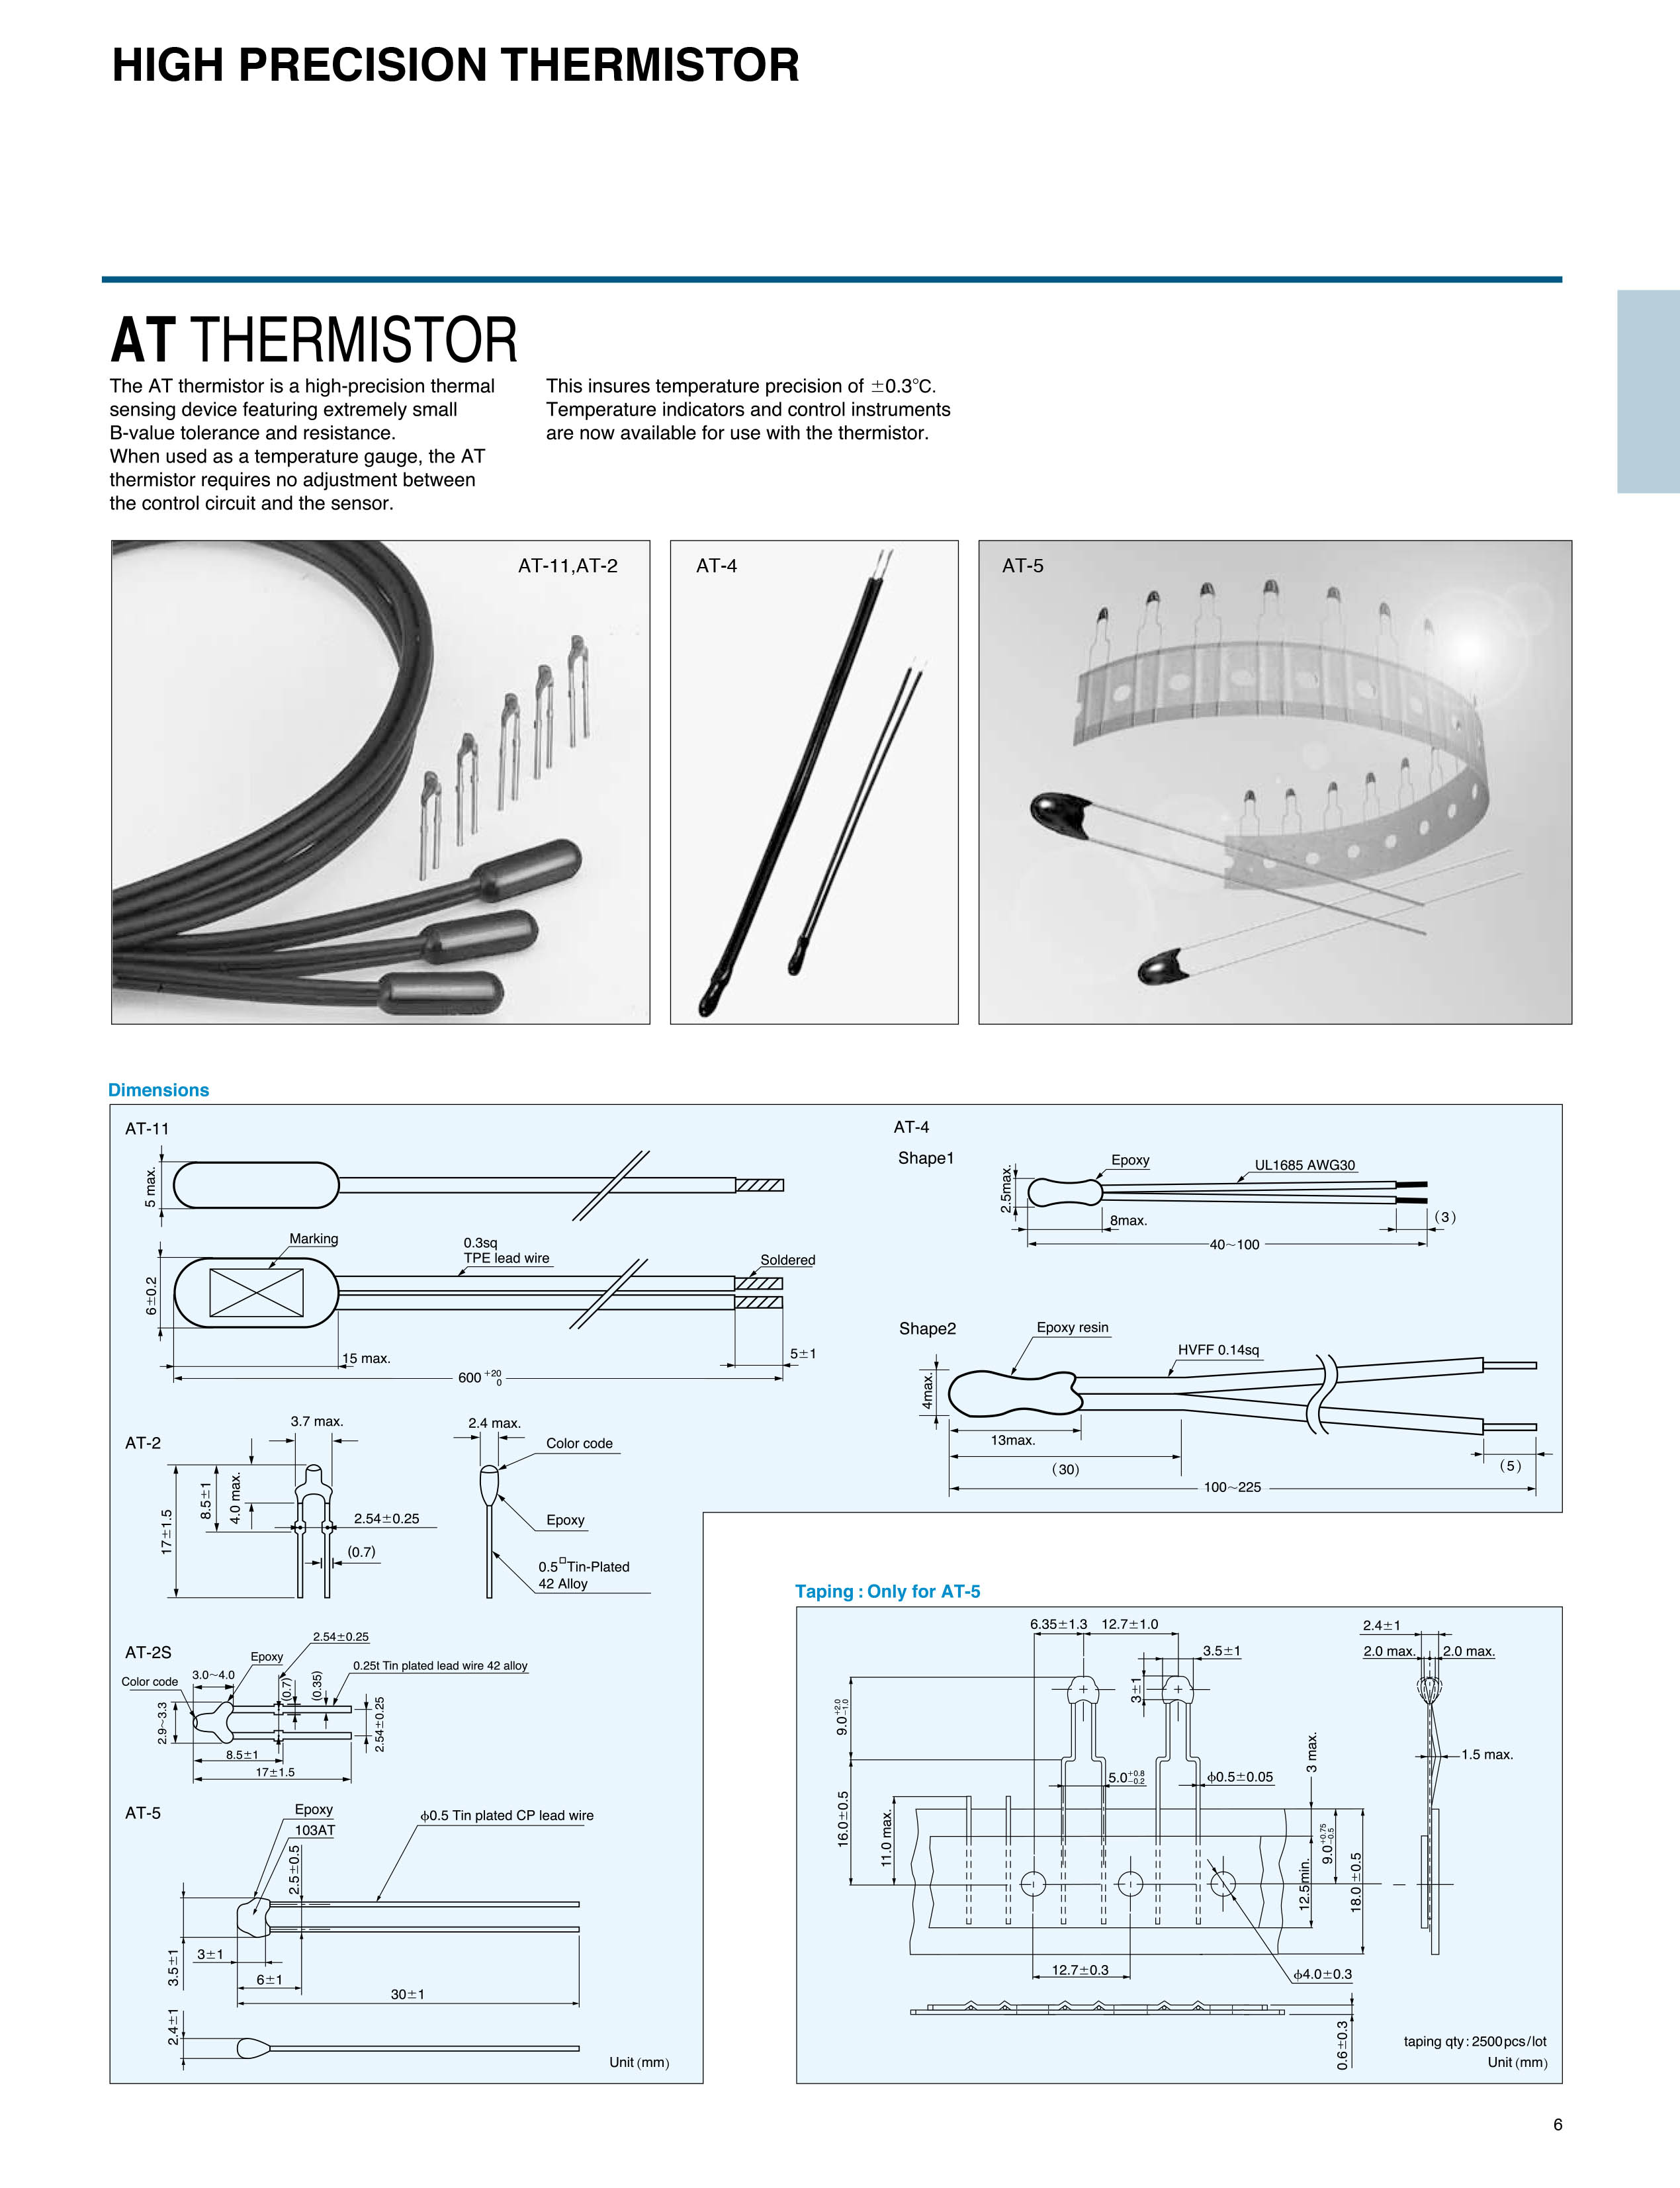 AT Thermistor